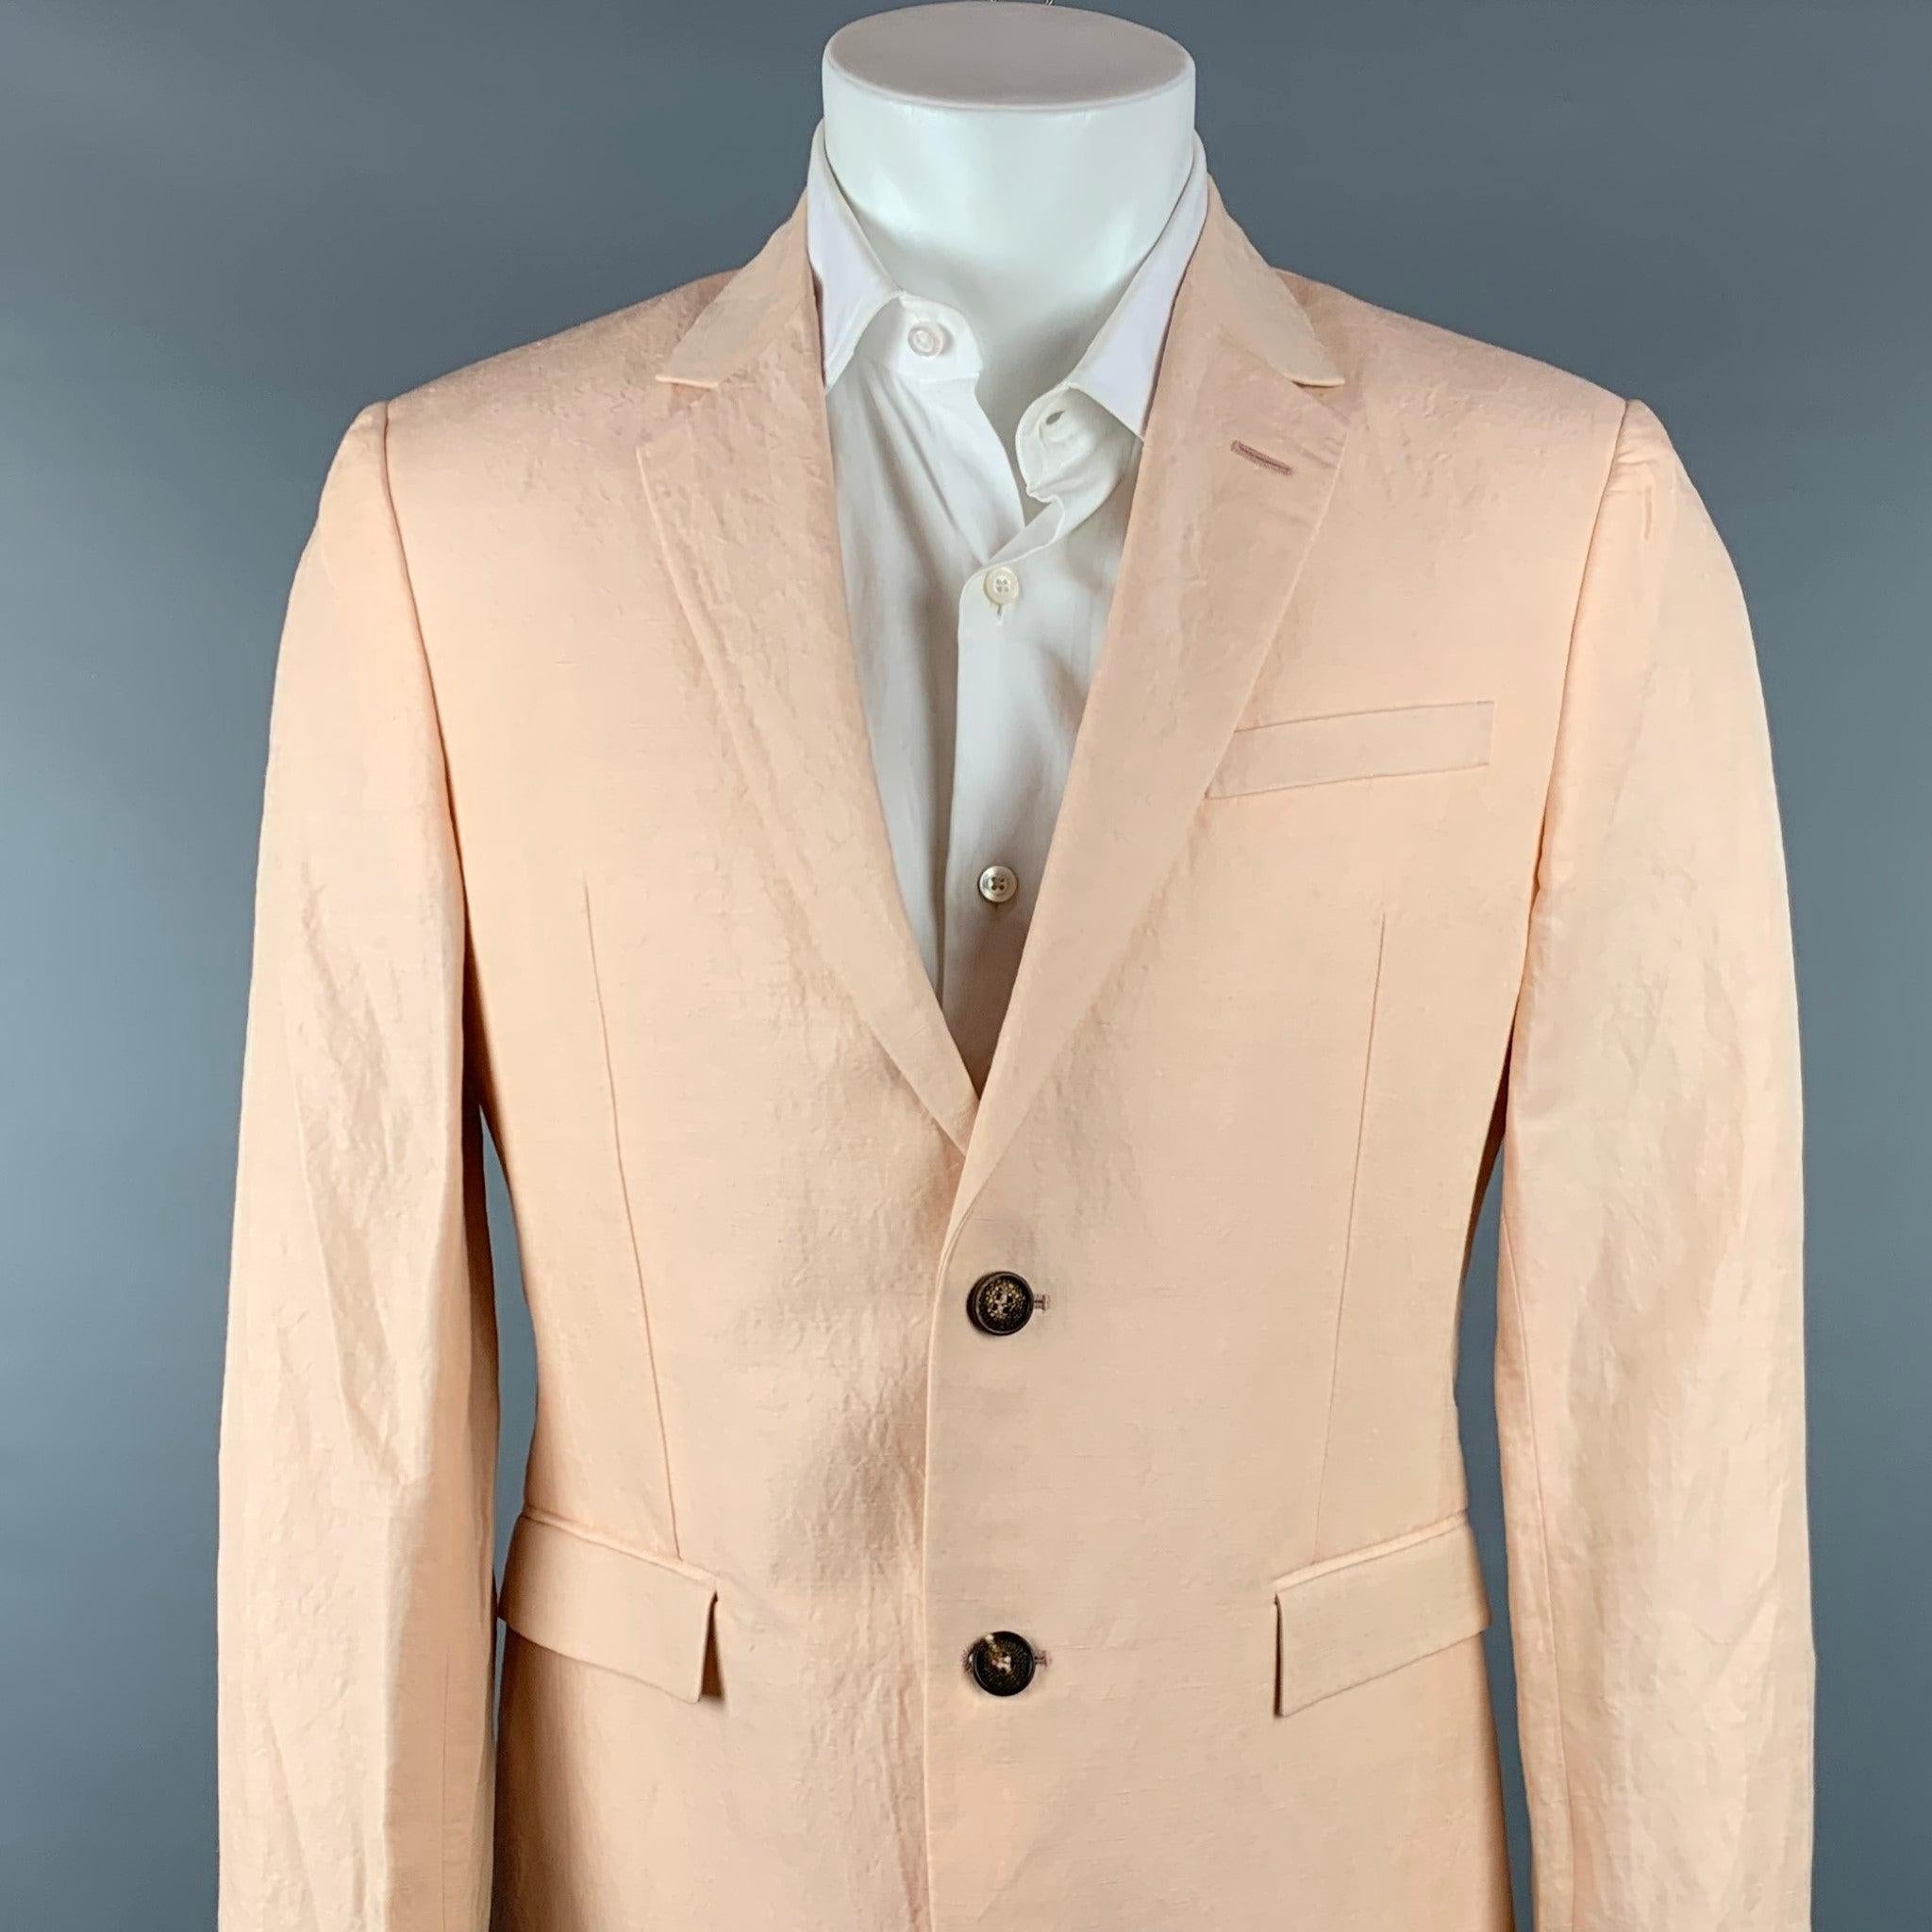 ROBERTO CAVALLI sport coat comes in a peach textured linen / silk with a half liner featuring a notch lapel, flap pockets, and a two button closure. Made in Italy.New With Tags. 

Marked:   IT 50 

Measurements: 
 
Shoulder: 16.5 inches  Chest: 40